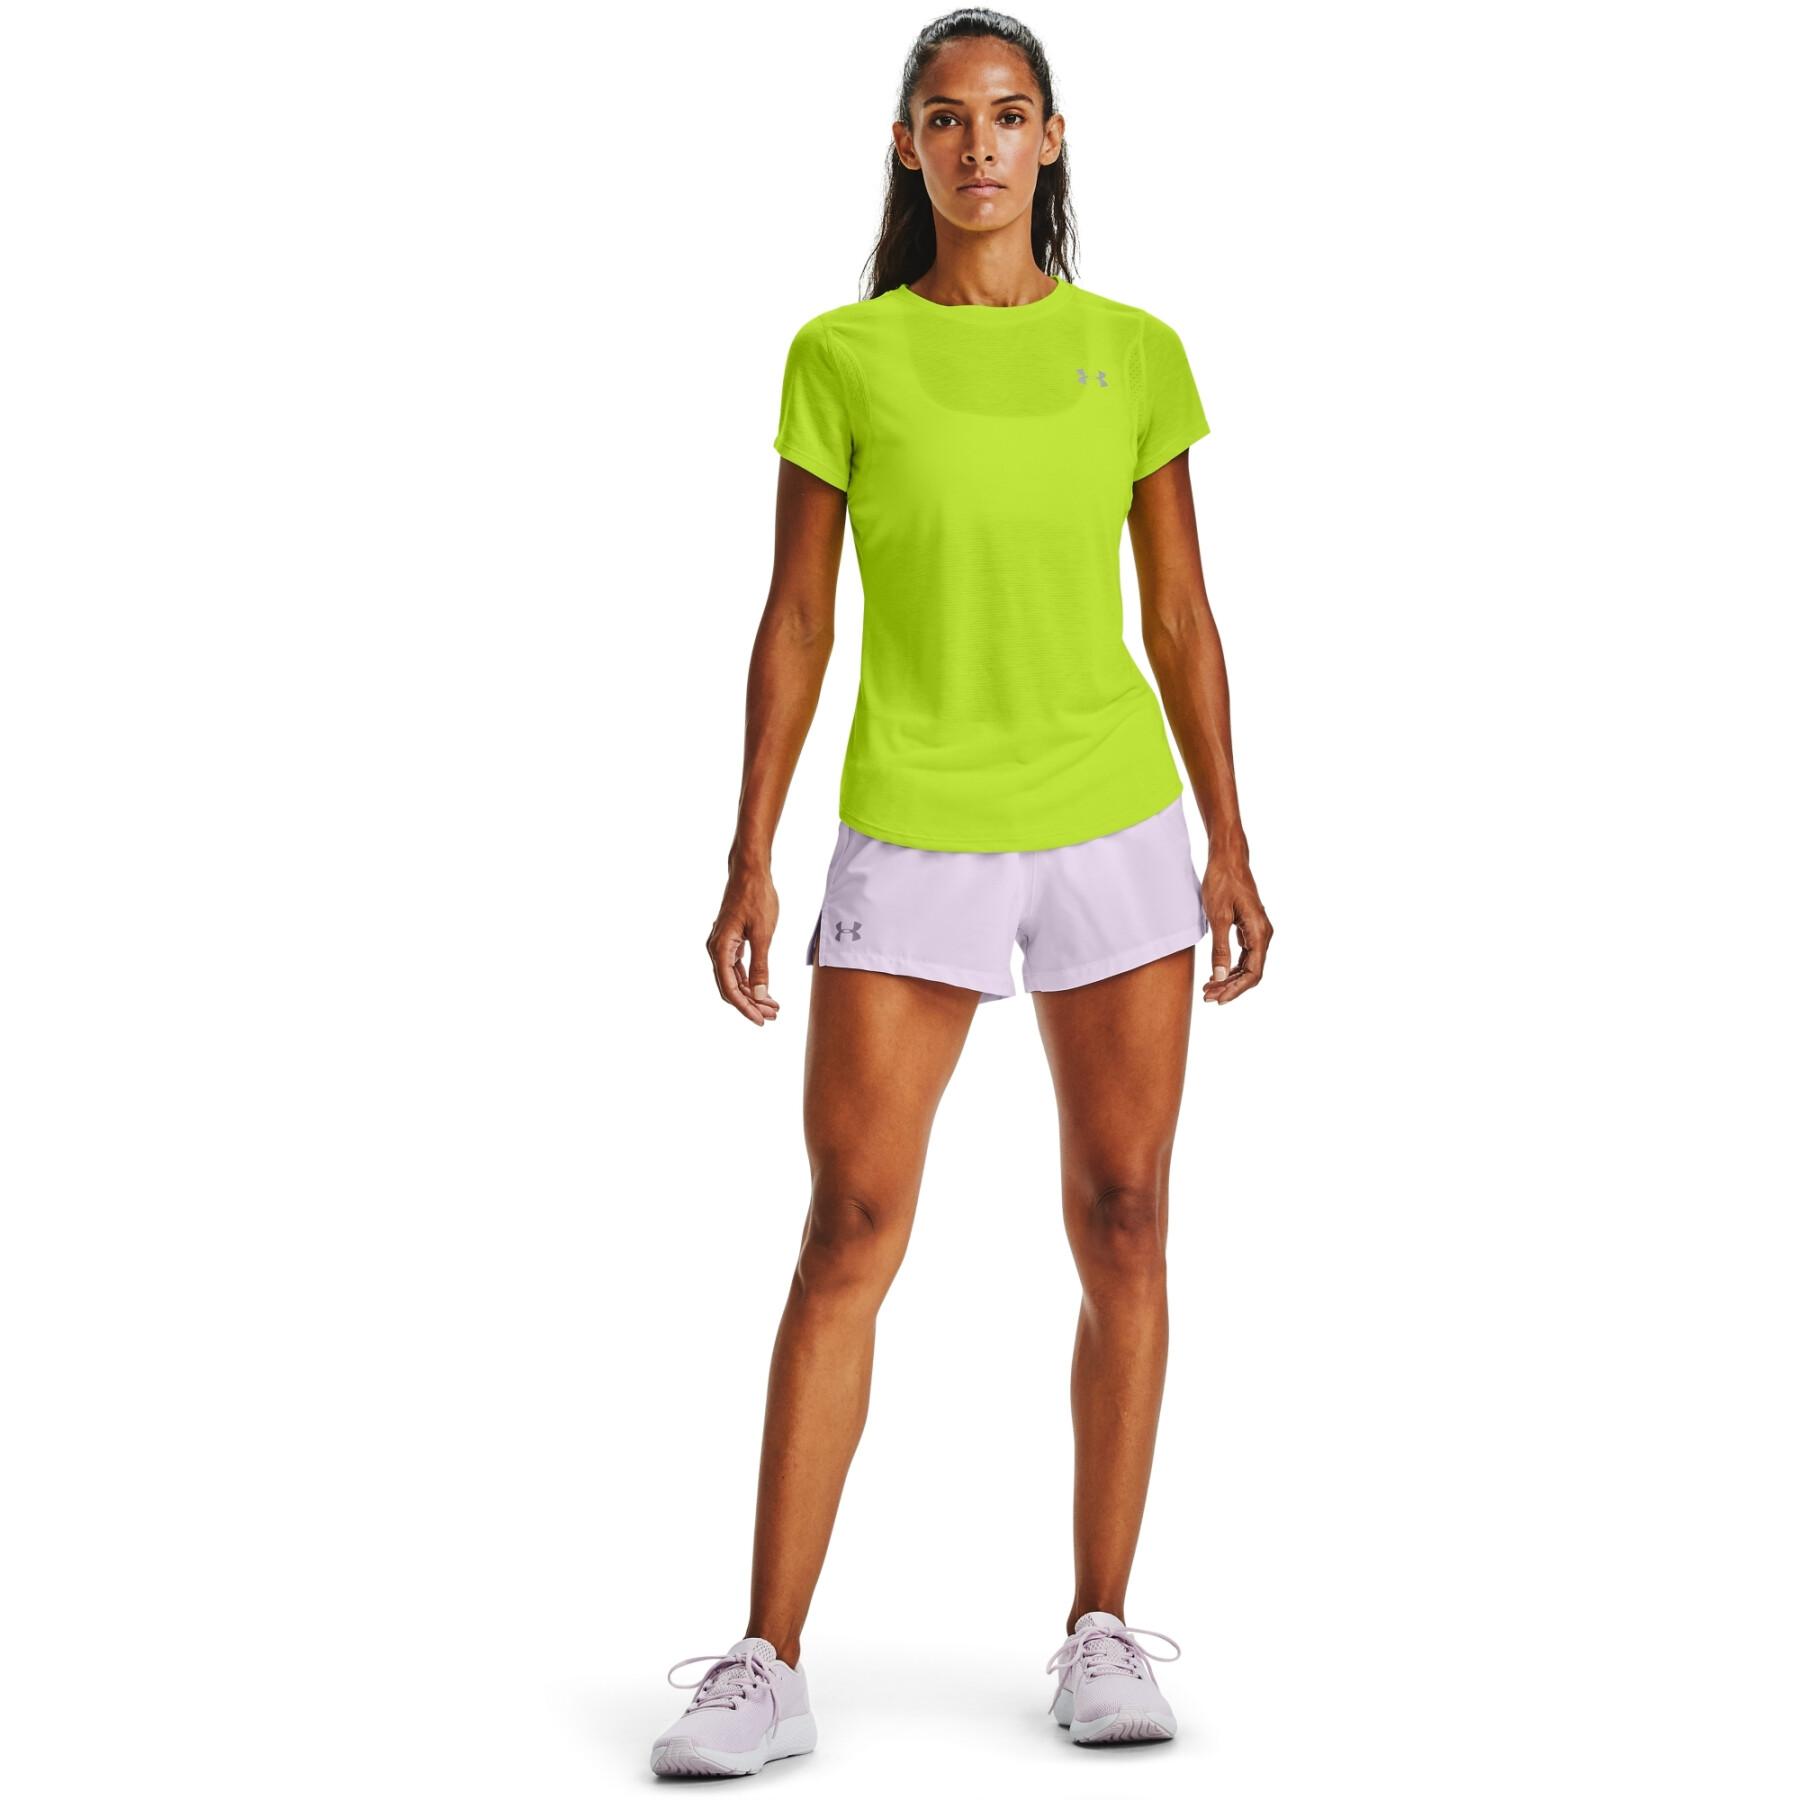 Damen-Shorts Under Armour Launch SW « Go All Day »